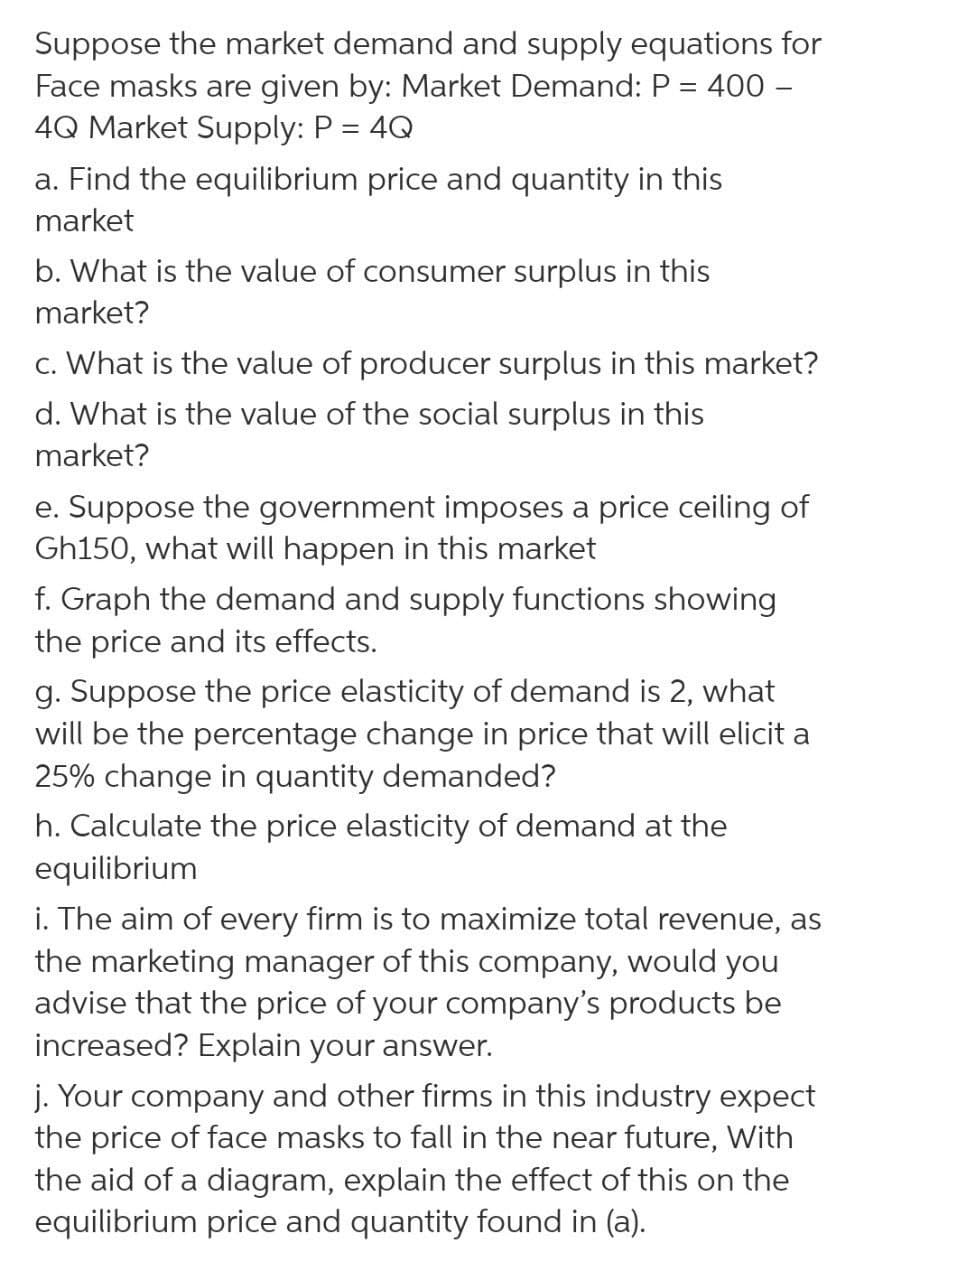 Suppose the market demand and supply equations for
Face masks are given by: Market Demand: P = 400 –
4Q Market Supply: P = 4Q
%3D
a. Find the equilibrium price and quantity in this
market
b. What is the value of consumer surplus in this
market?
c. What is the value of producer surplus in this market?
d. What is the value of the social surplus in this
market?
e. Suppose the government imposes a price ceiling of
Gh150, what will happen in this market
f. Graph the demand and supply functions showing
the price and its effects.
g. Suppose the price elasticity of demand is 2, what
will be the percentage change in price that will elicit a
25% change in quantity demanded?
h. Calculate the price elasticity of demand at the
equilibrium
i. The aim of every firm is to maximize total revenue, as
the marketing manager of this company, would you
advise that the price of your company's products be
increased? Explain your answer.
j. Your company and other firms in this industry expect
the price of face masks to fall in the near future, With
the aid of a diagram, explain the effect of this on the
equilibrium price and quantity found in (a).
